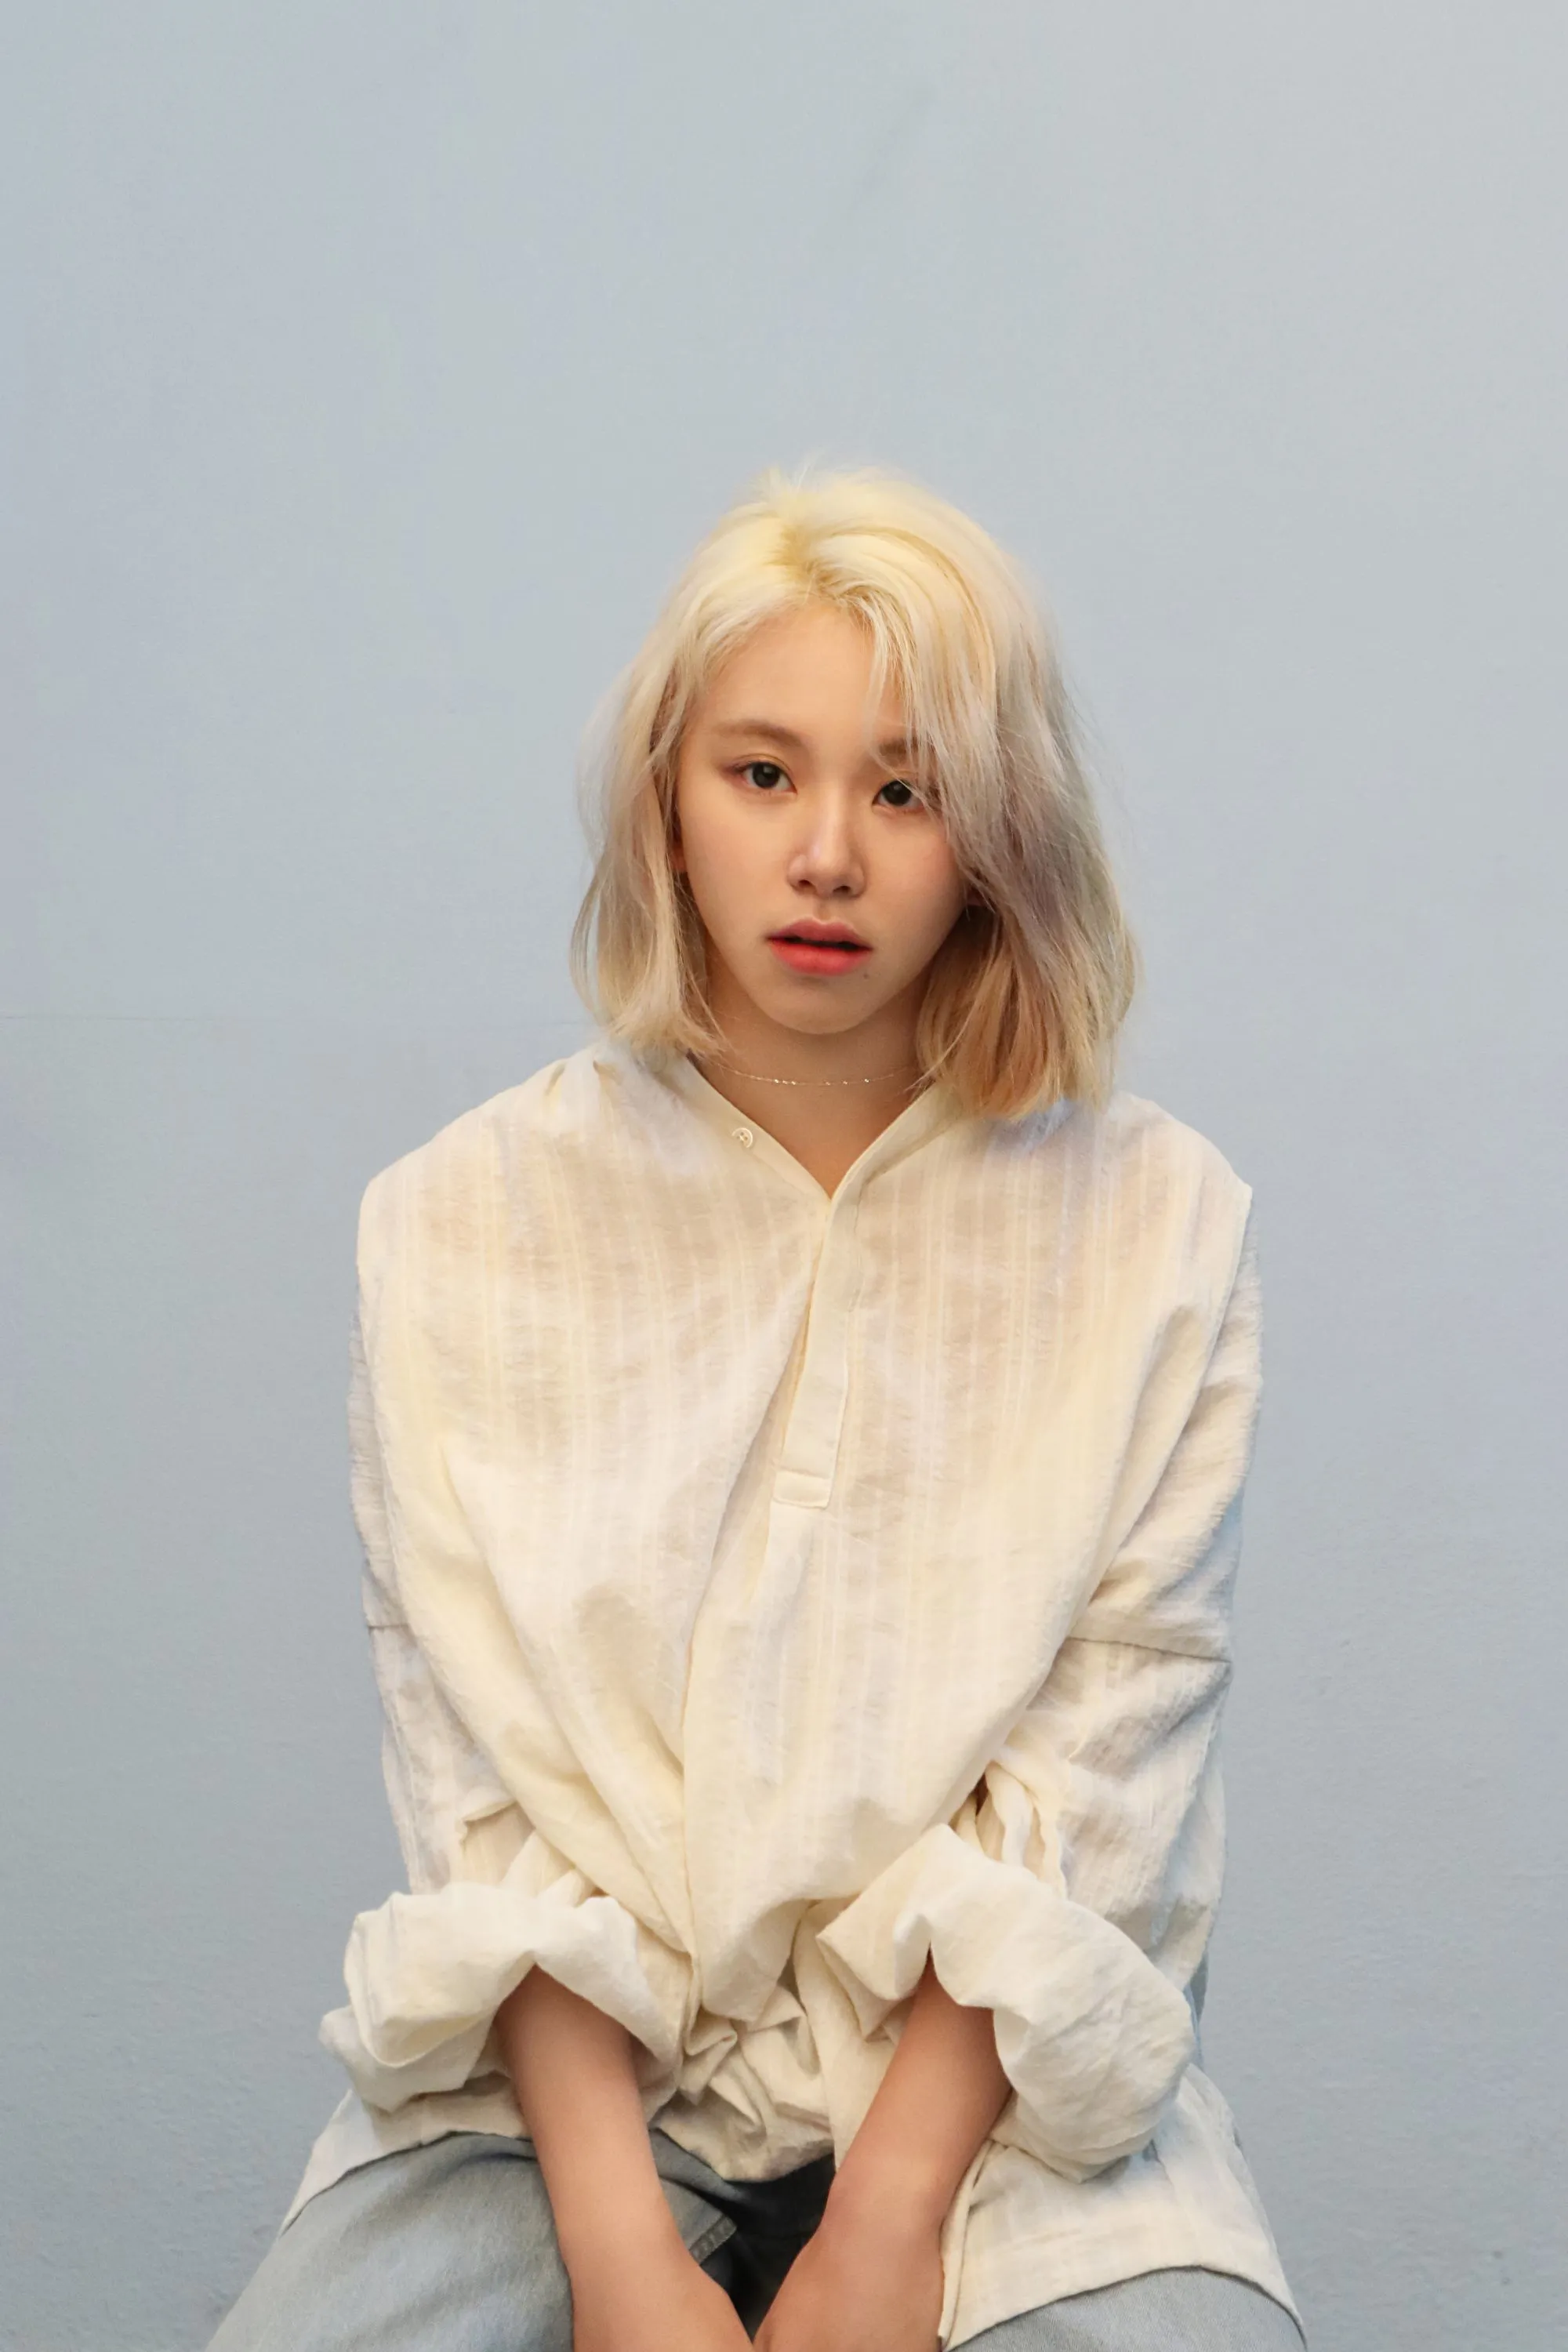 Behind The Scenes Of Twice Chaeyoung S Photoshoot For Ohboy Magazine Kpopping